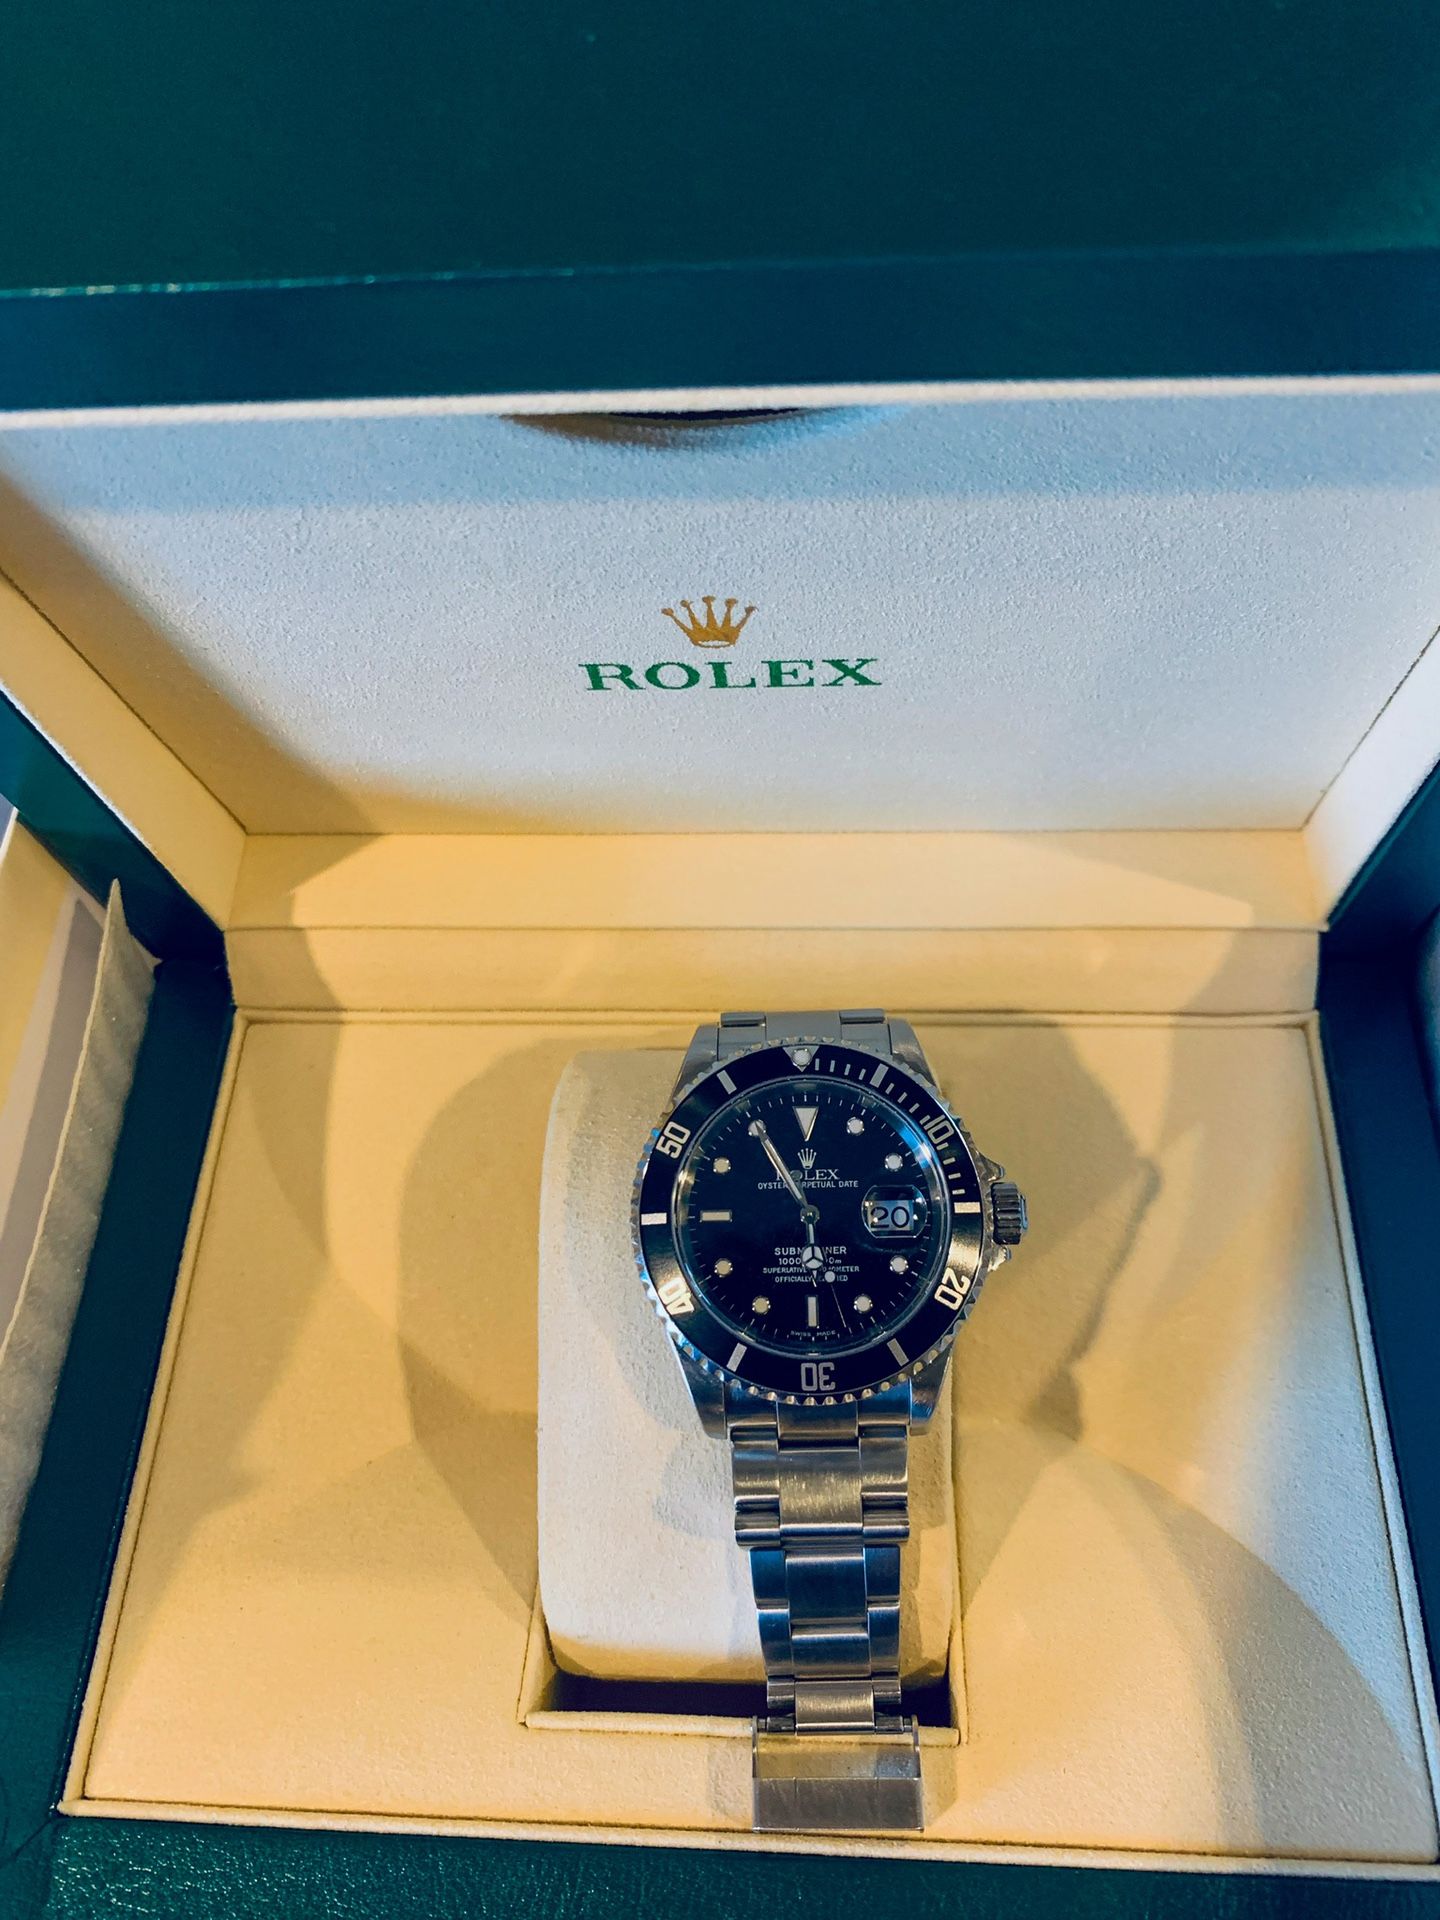 Great condition Rolex Submariner 16610 with Oyster bracelet and rubber strap